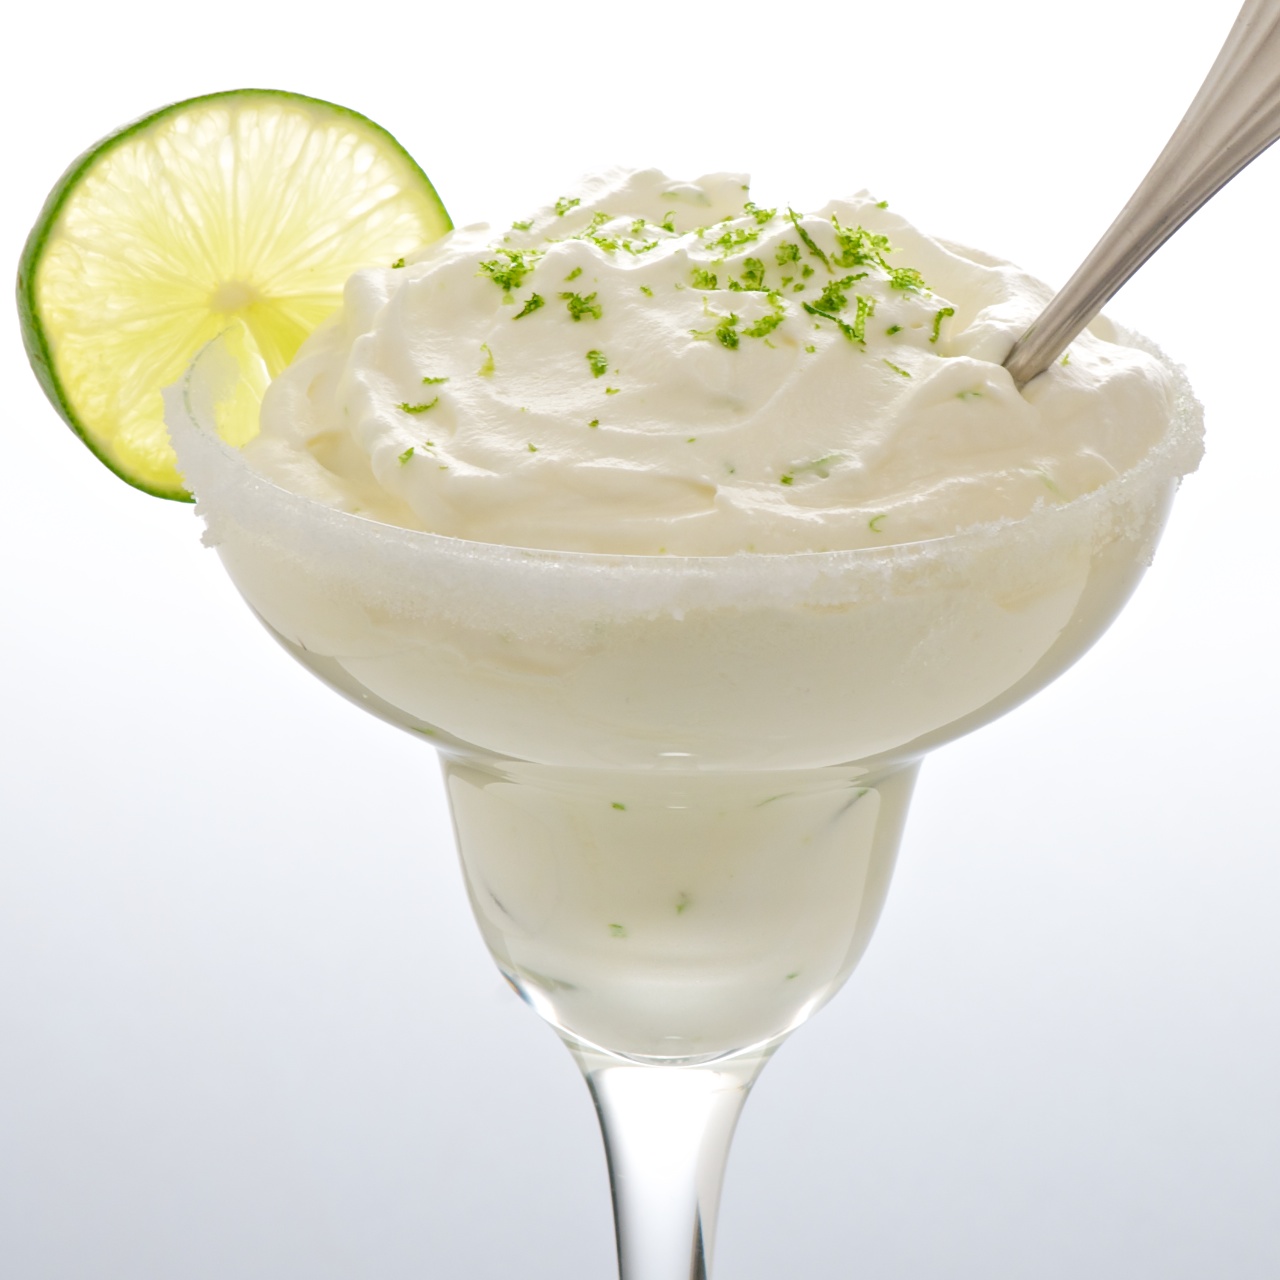 An adults-only dessert with the tangy flavors of tequila and lime in a creamy mousse, for an unexpected kick.